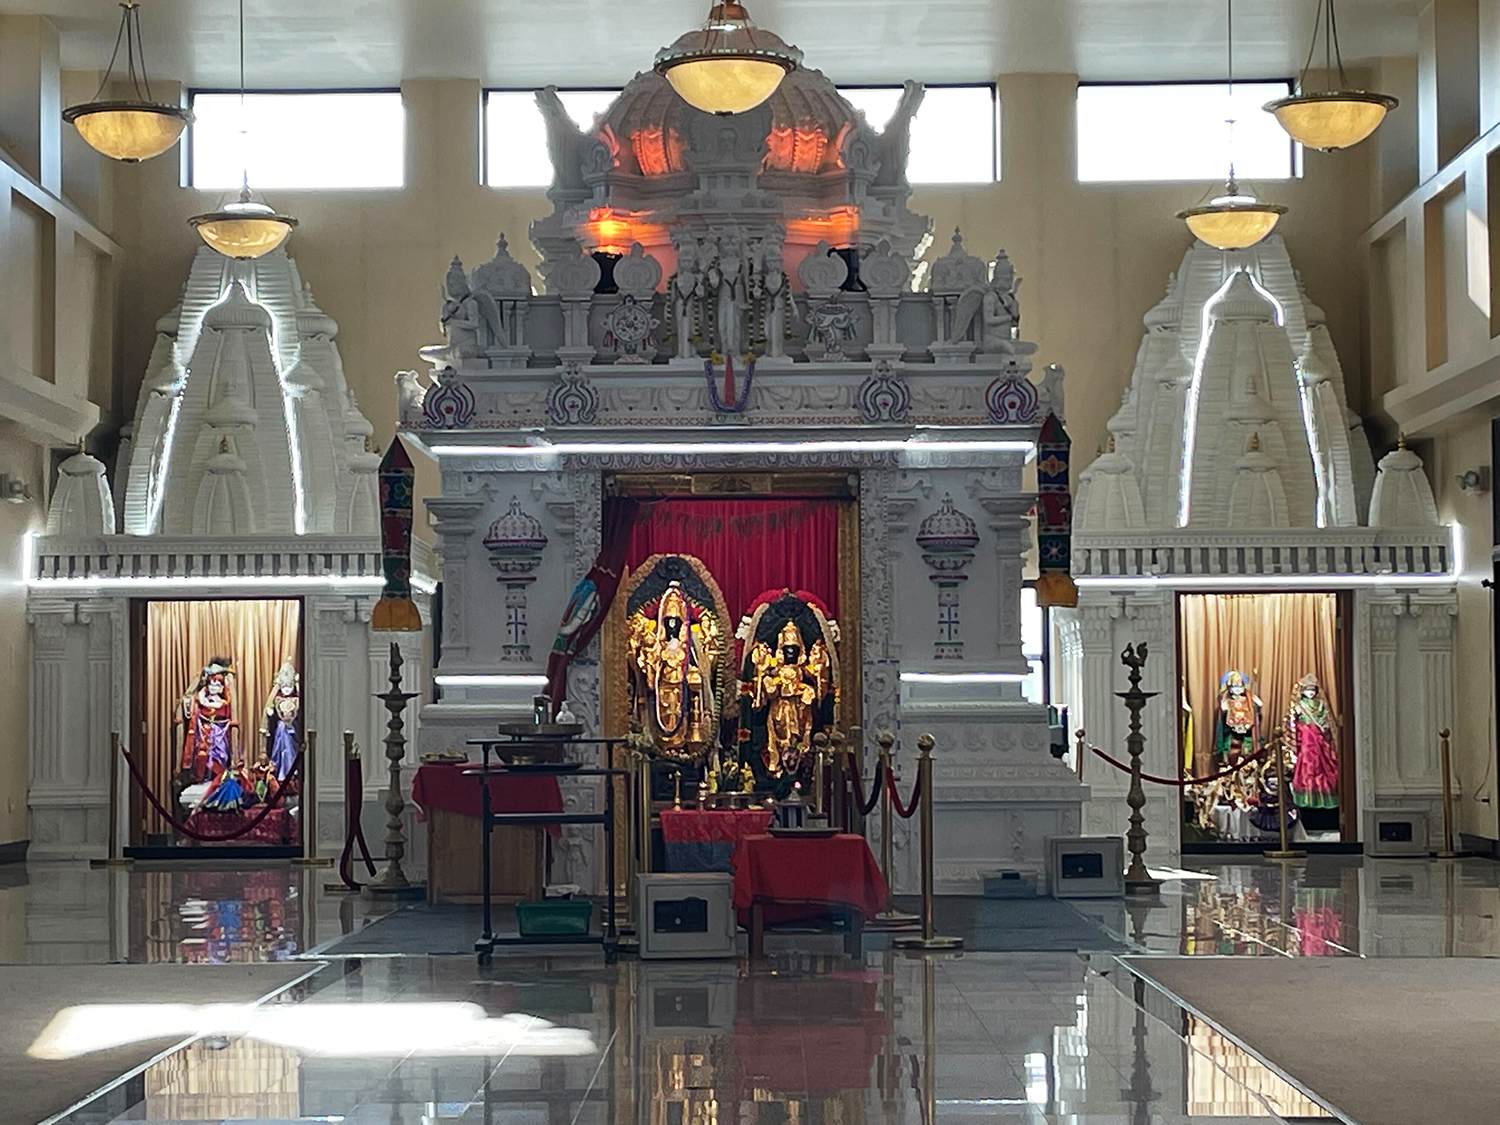 An inside view of the Hindu temple located in Pewaukee, Wisconsin. RNS photo by Richa Karmarkar